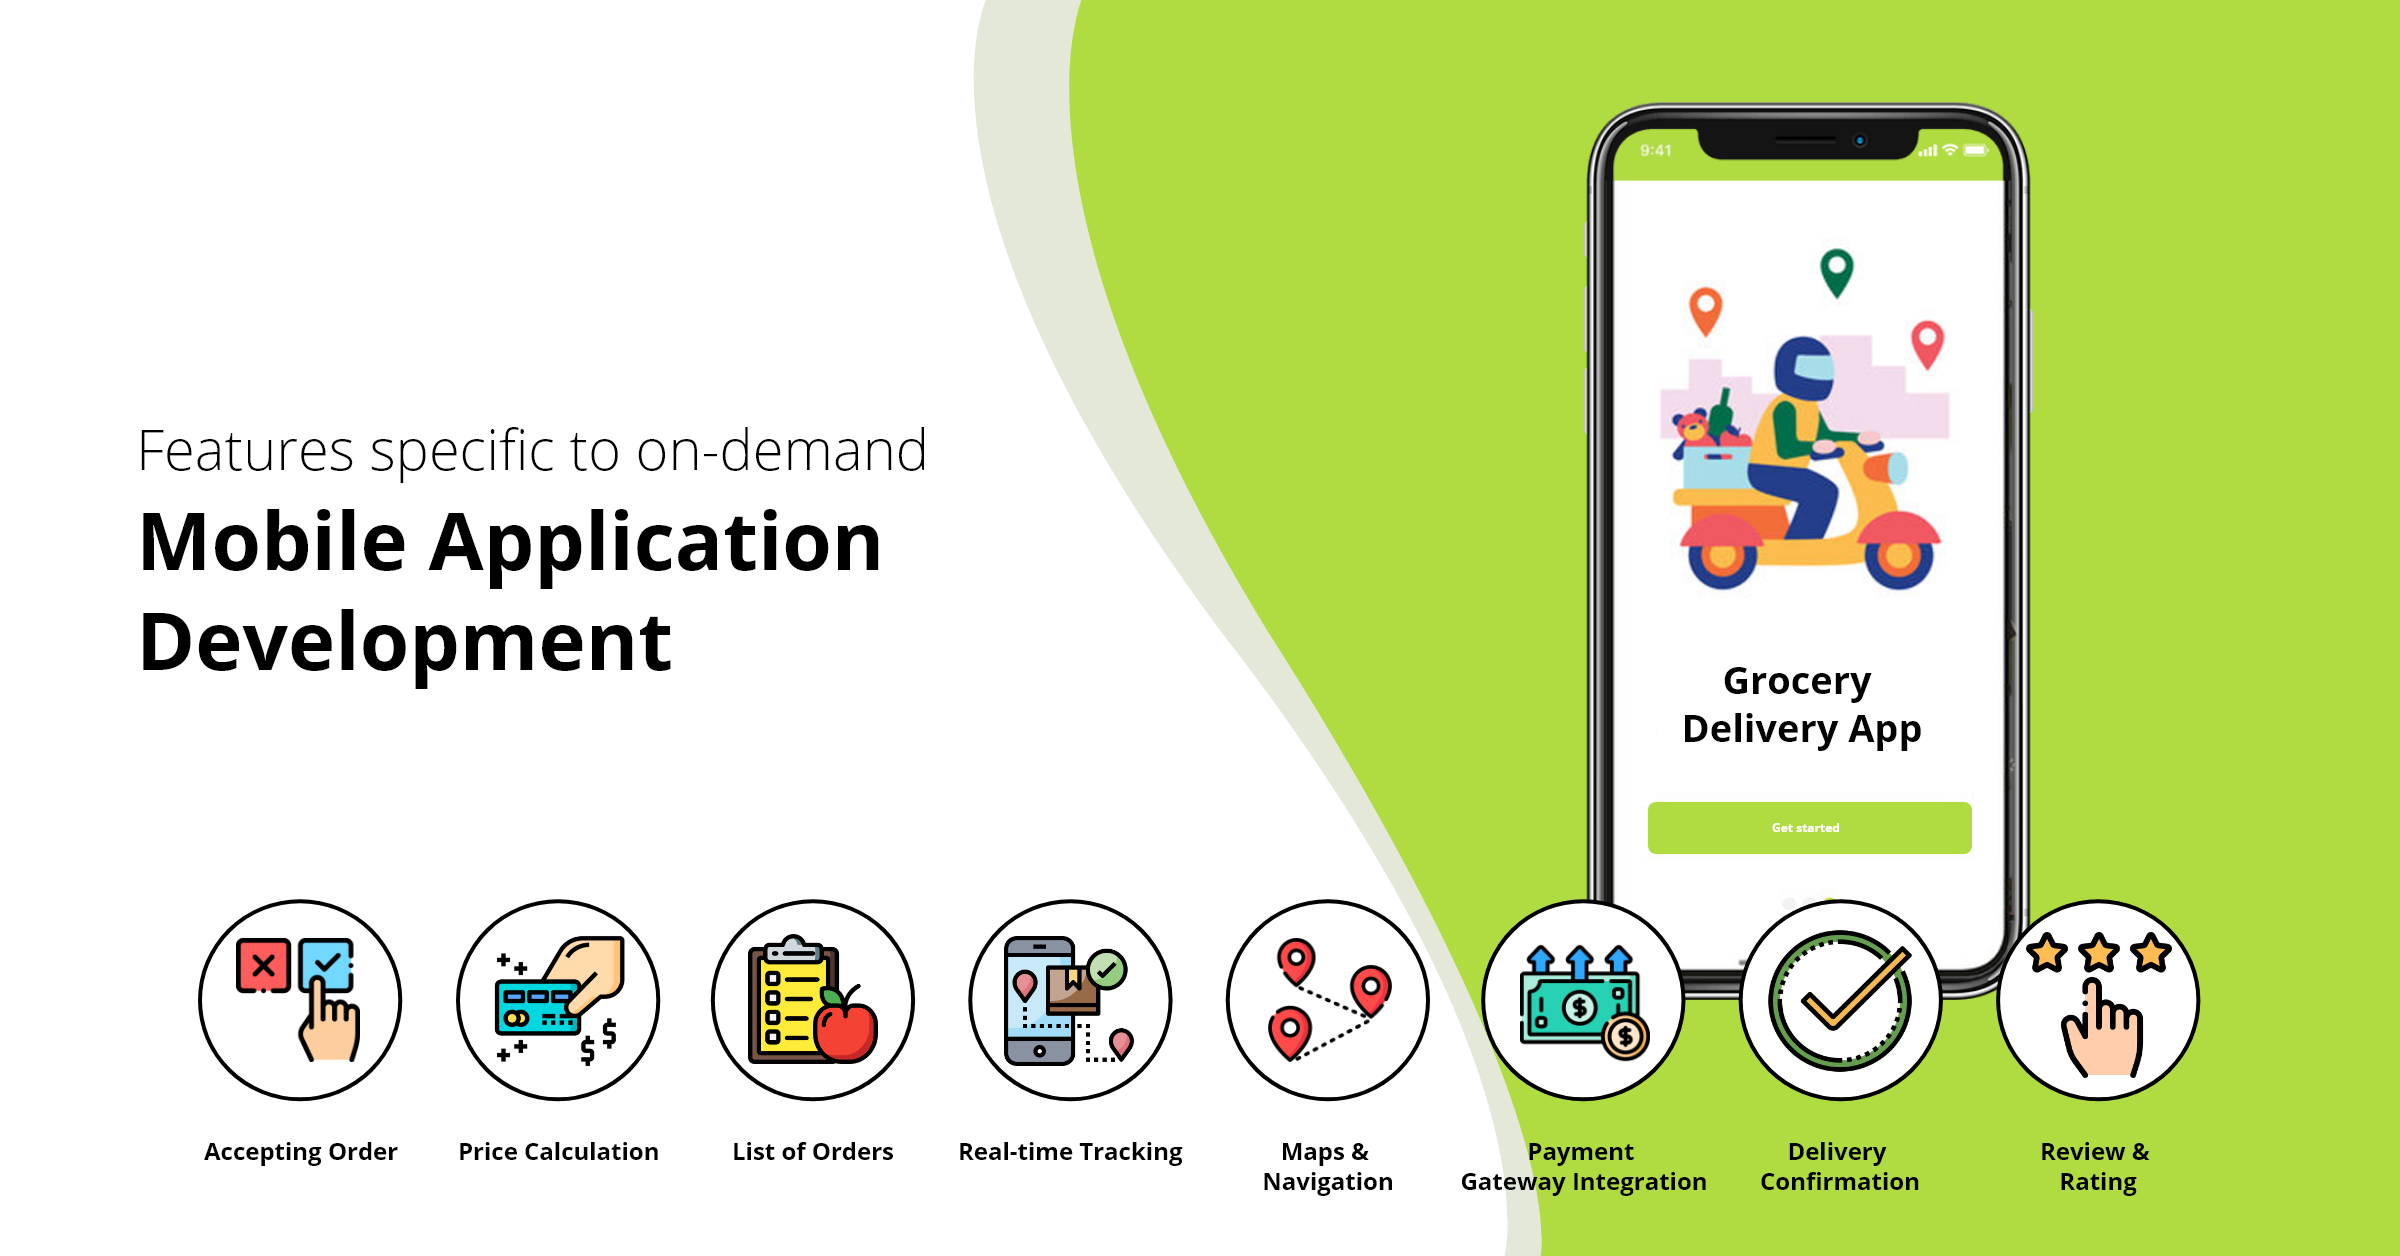 Features specific to on-demand mobile apps development